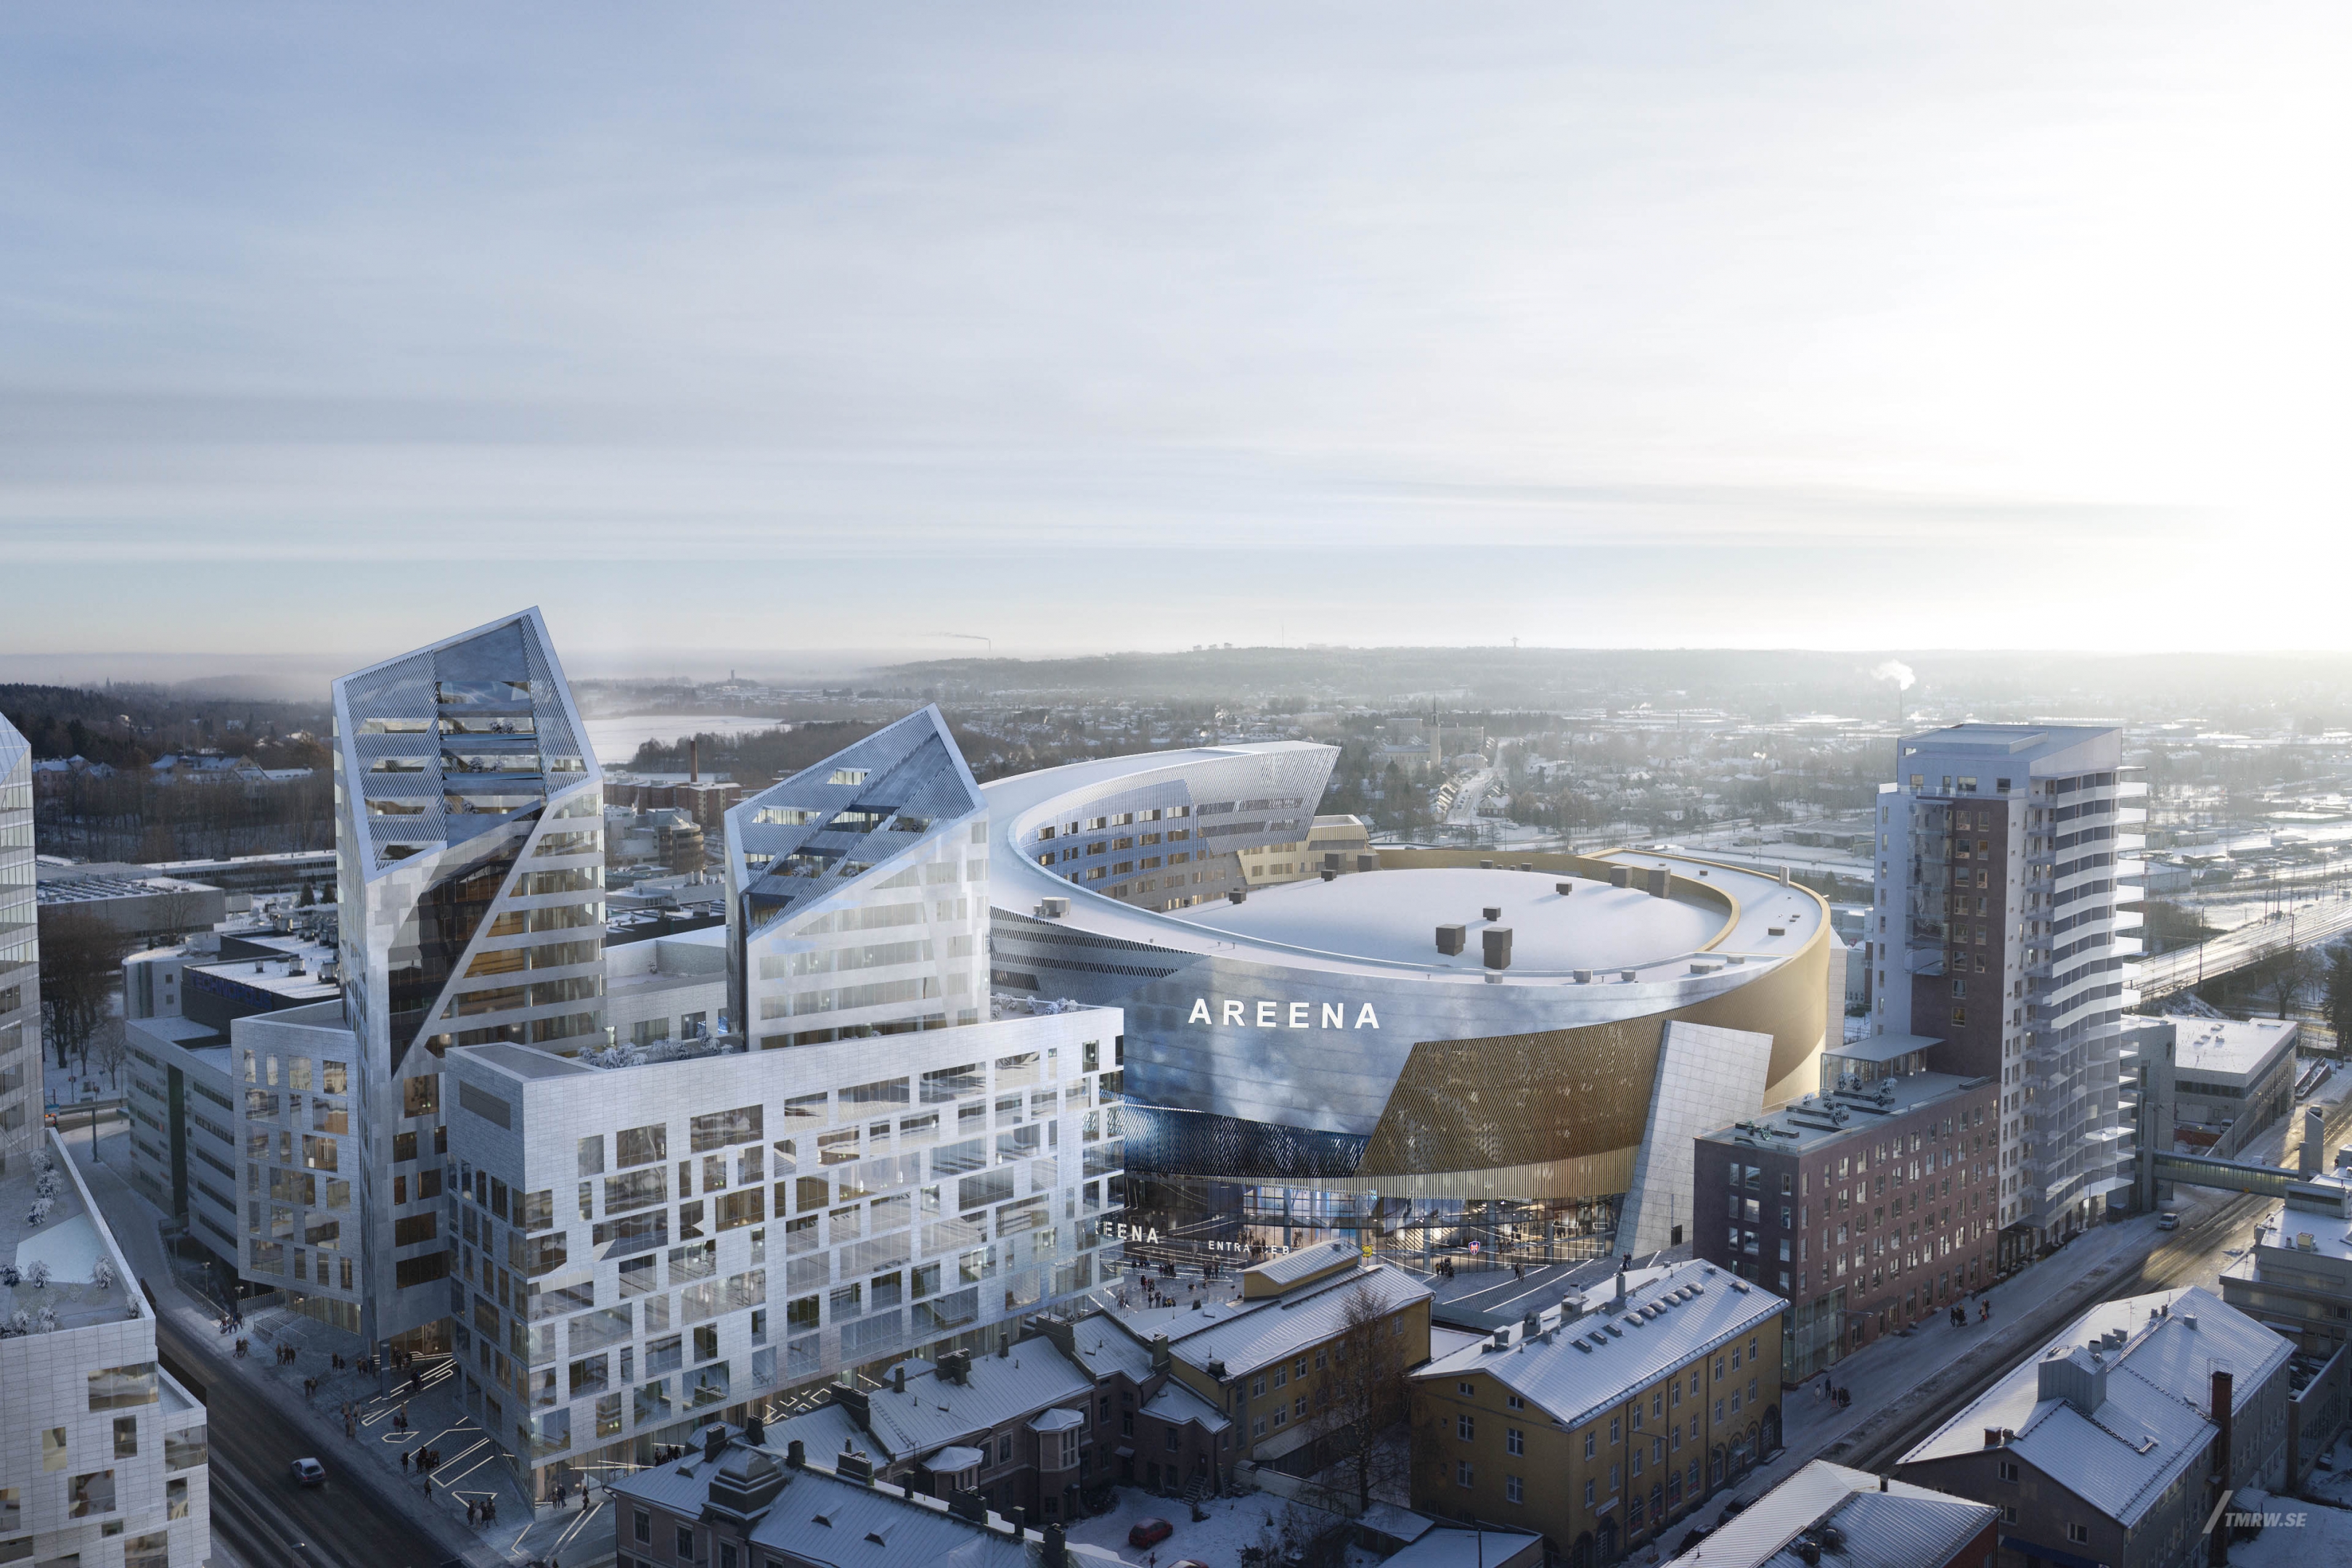 Architectural visualization of Tampere for Libeskind a arena in snowy Tampere, Finland in day light from an aerial view.